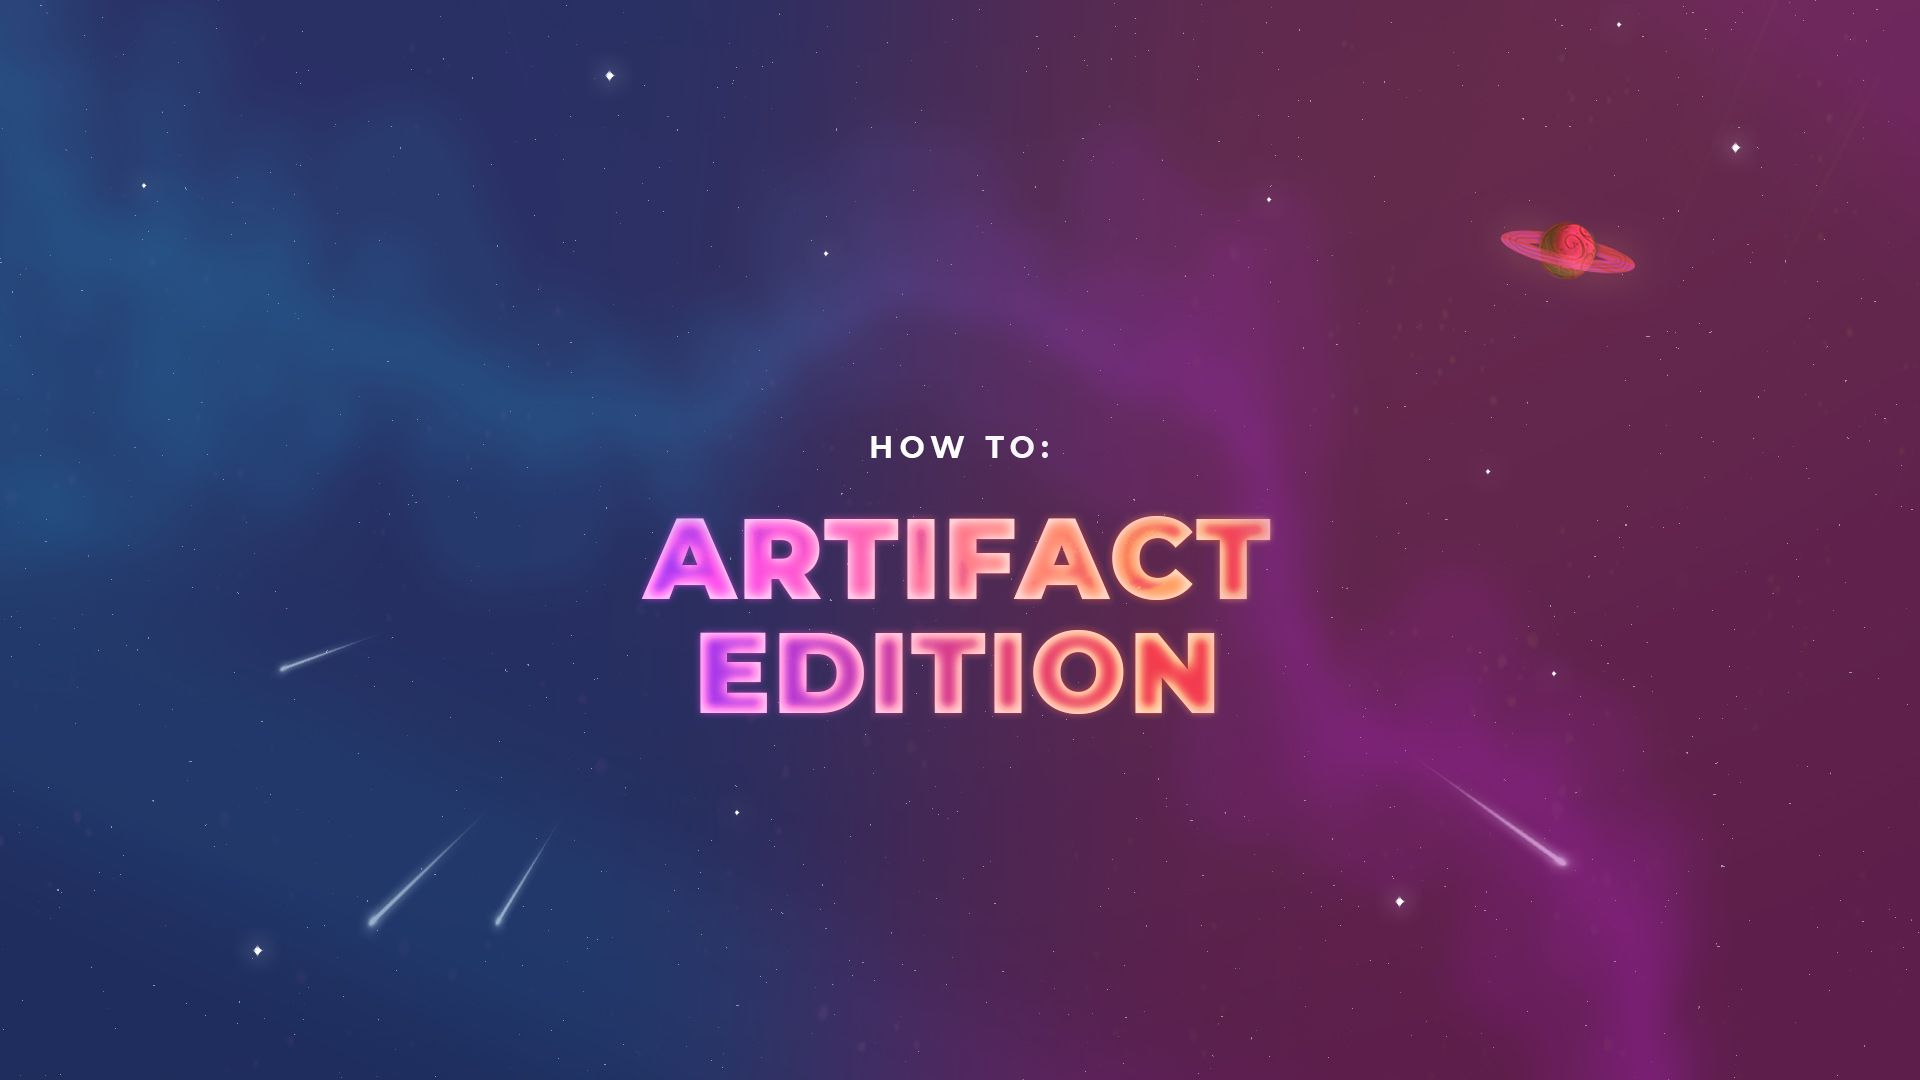 How To: Artifact Edition